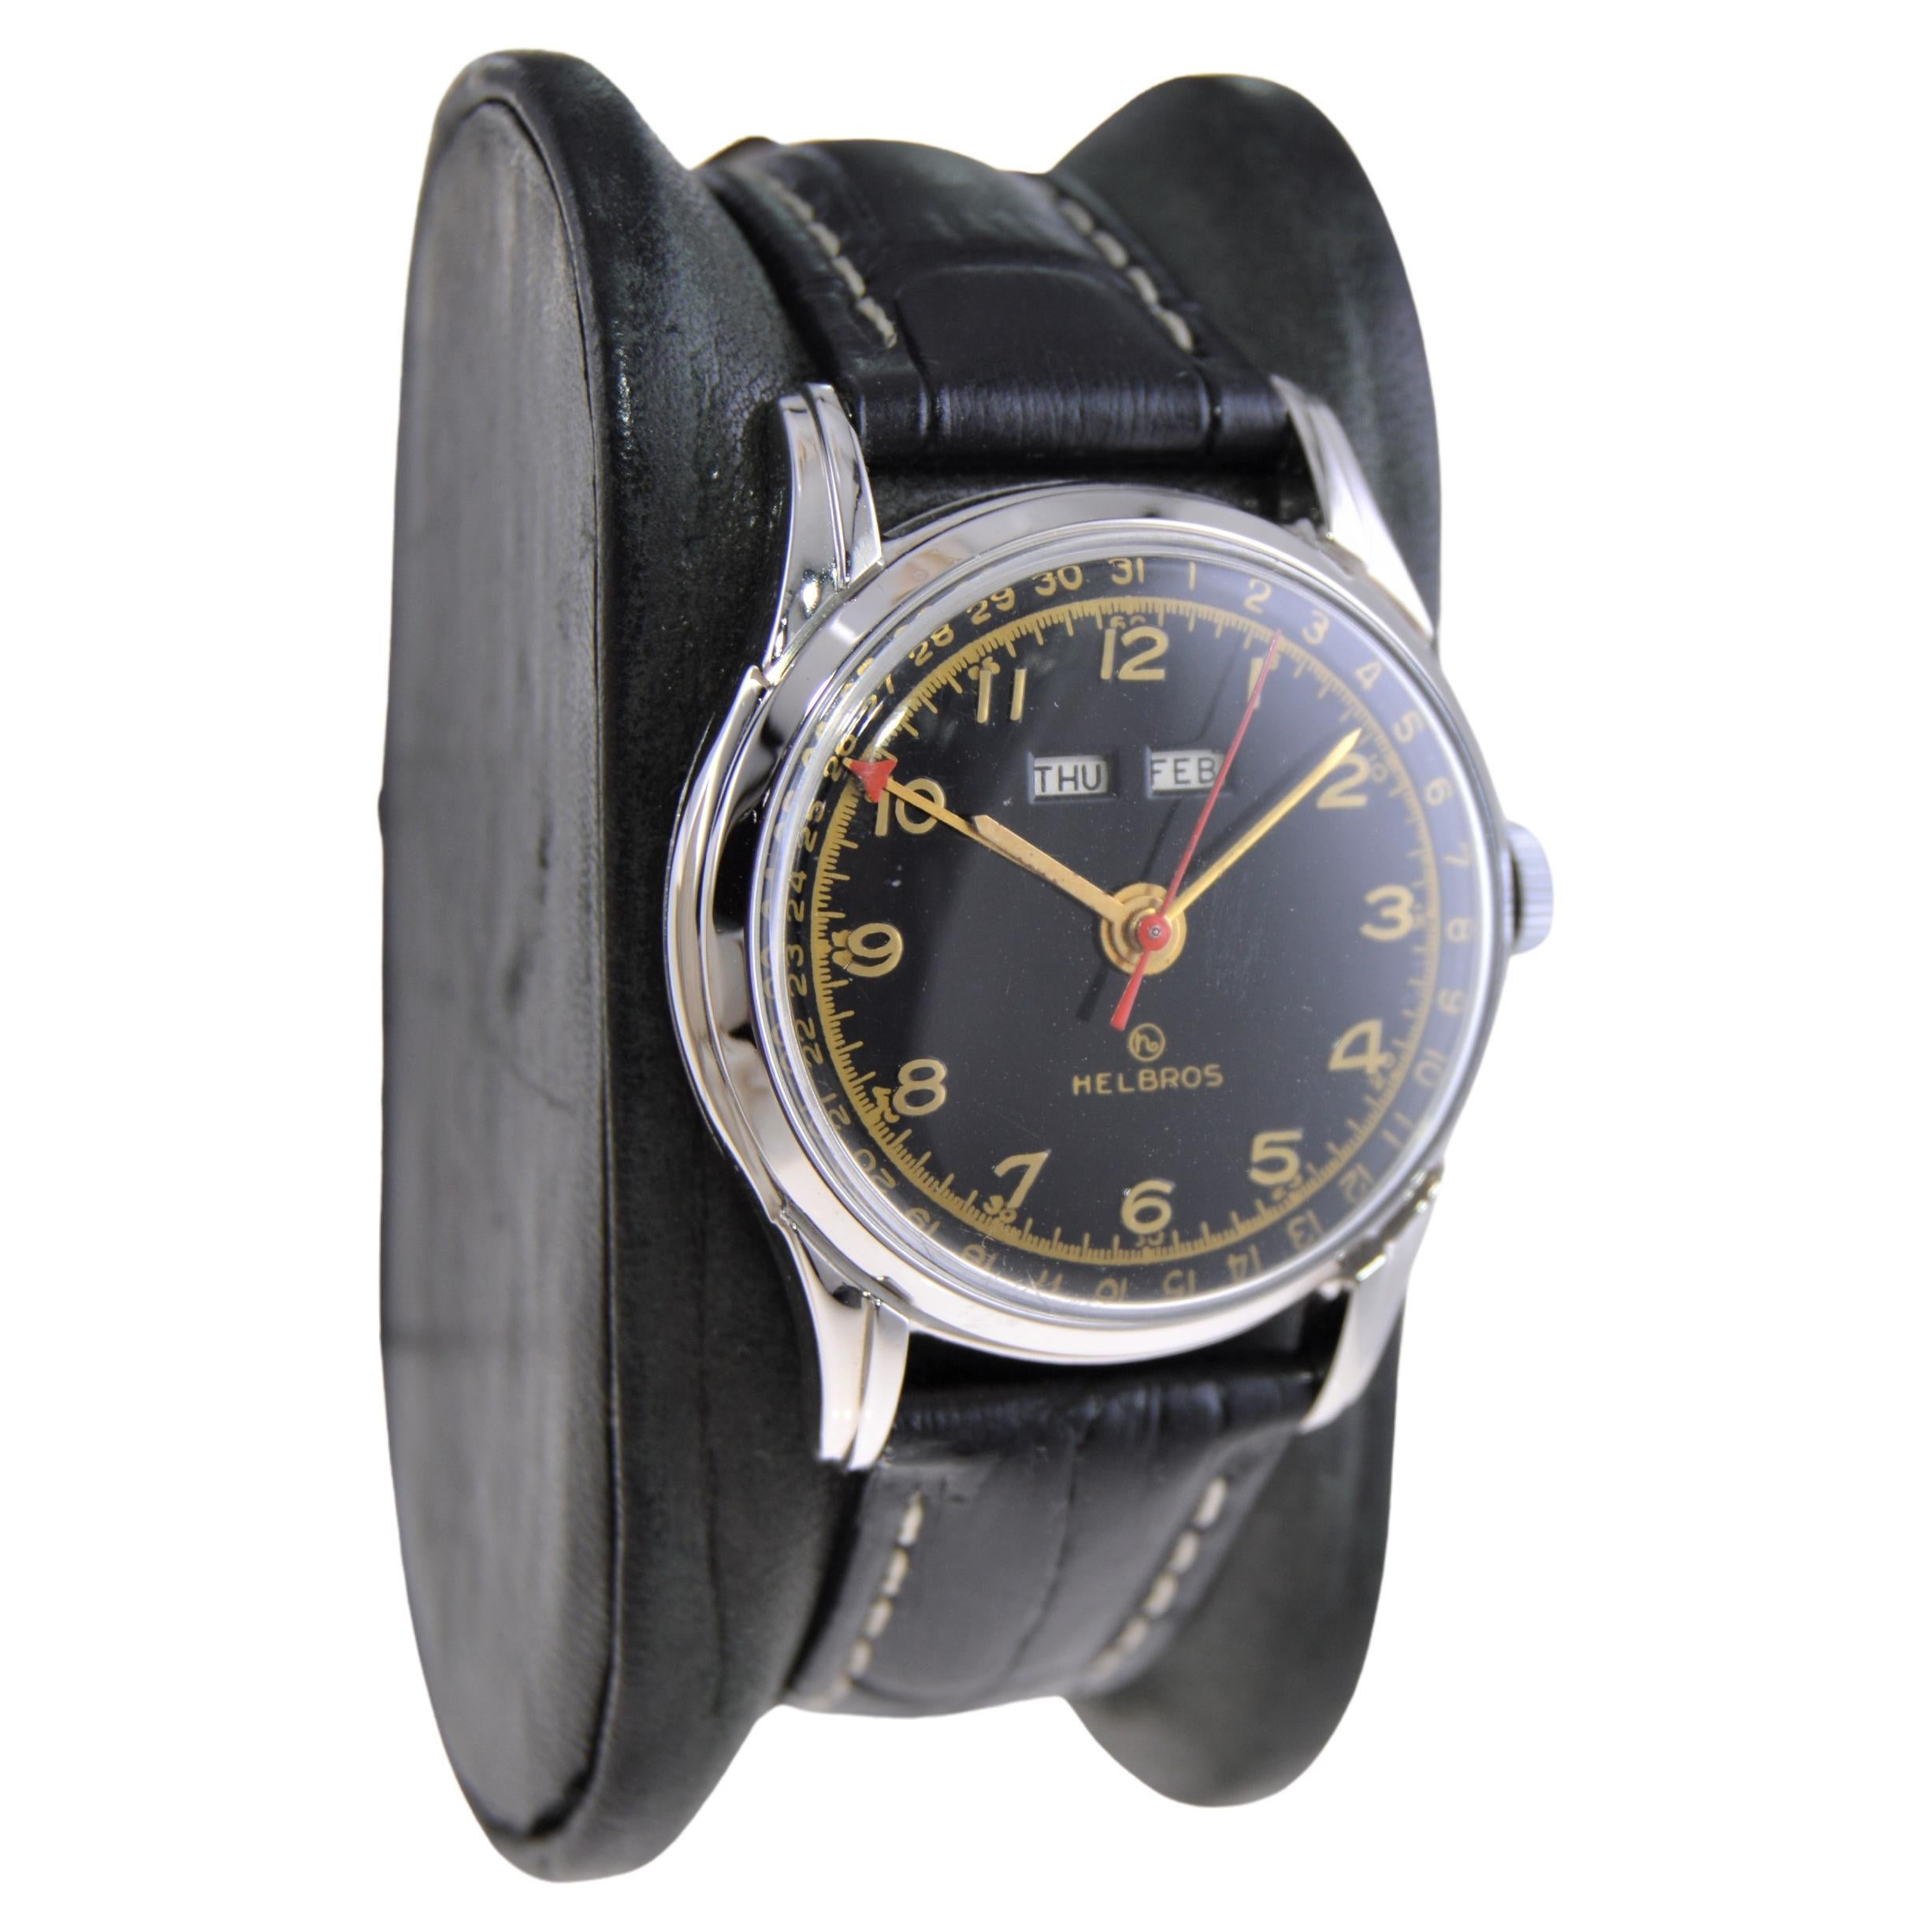 FACTORY / HOUSE: Helbros Watch Company
STYLE / REFERENCE: Triple Date / Calendar / Art Deco
METAL / MATERIAL: Chromium and Steel
CIRCA / YEAR: 1950's
DIMENSIONS / SIZE:  Length 38mm X Diameter 31mm
MOVEMENT / CALIBER: Manual Winding / 17 Jewels /